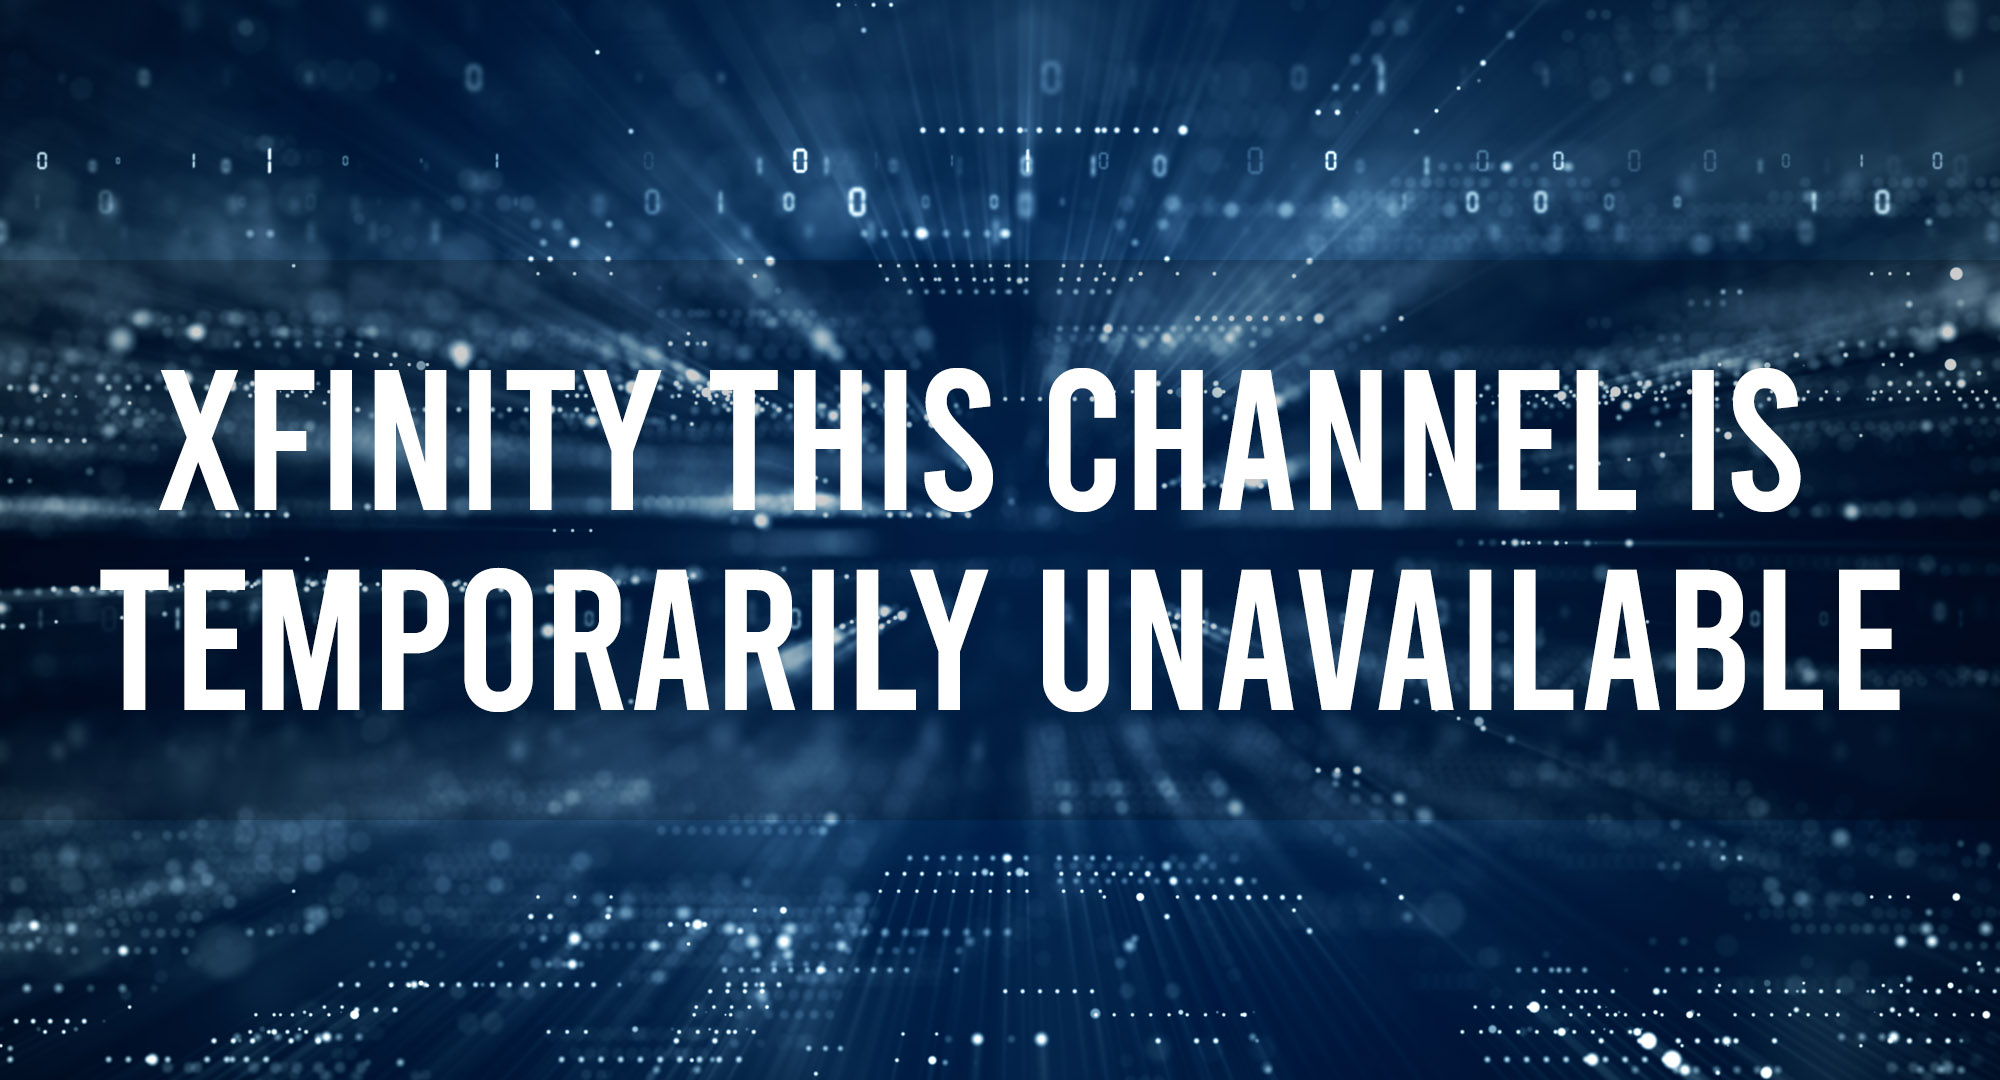 Xfinity This Channel is Temporarily Unavailable